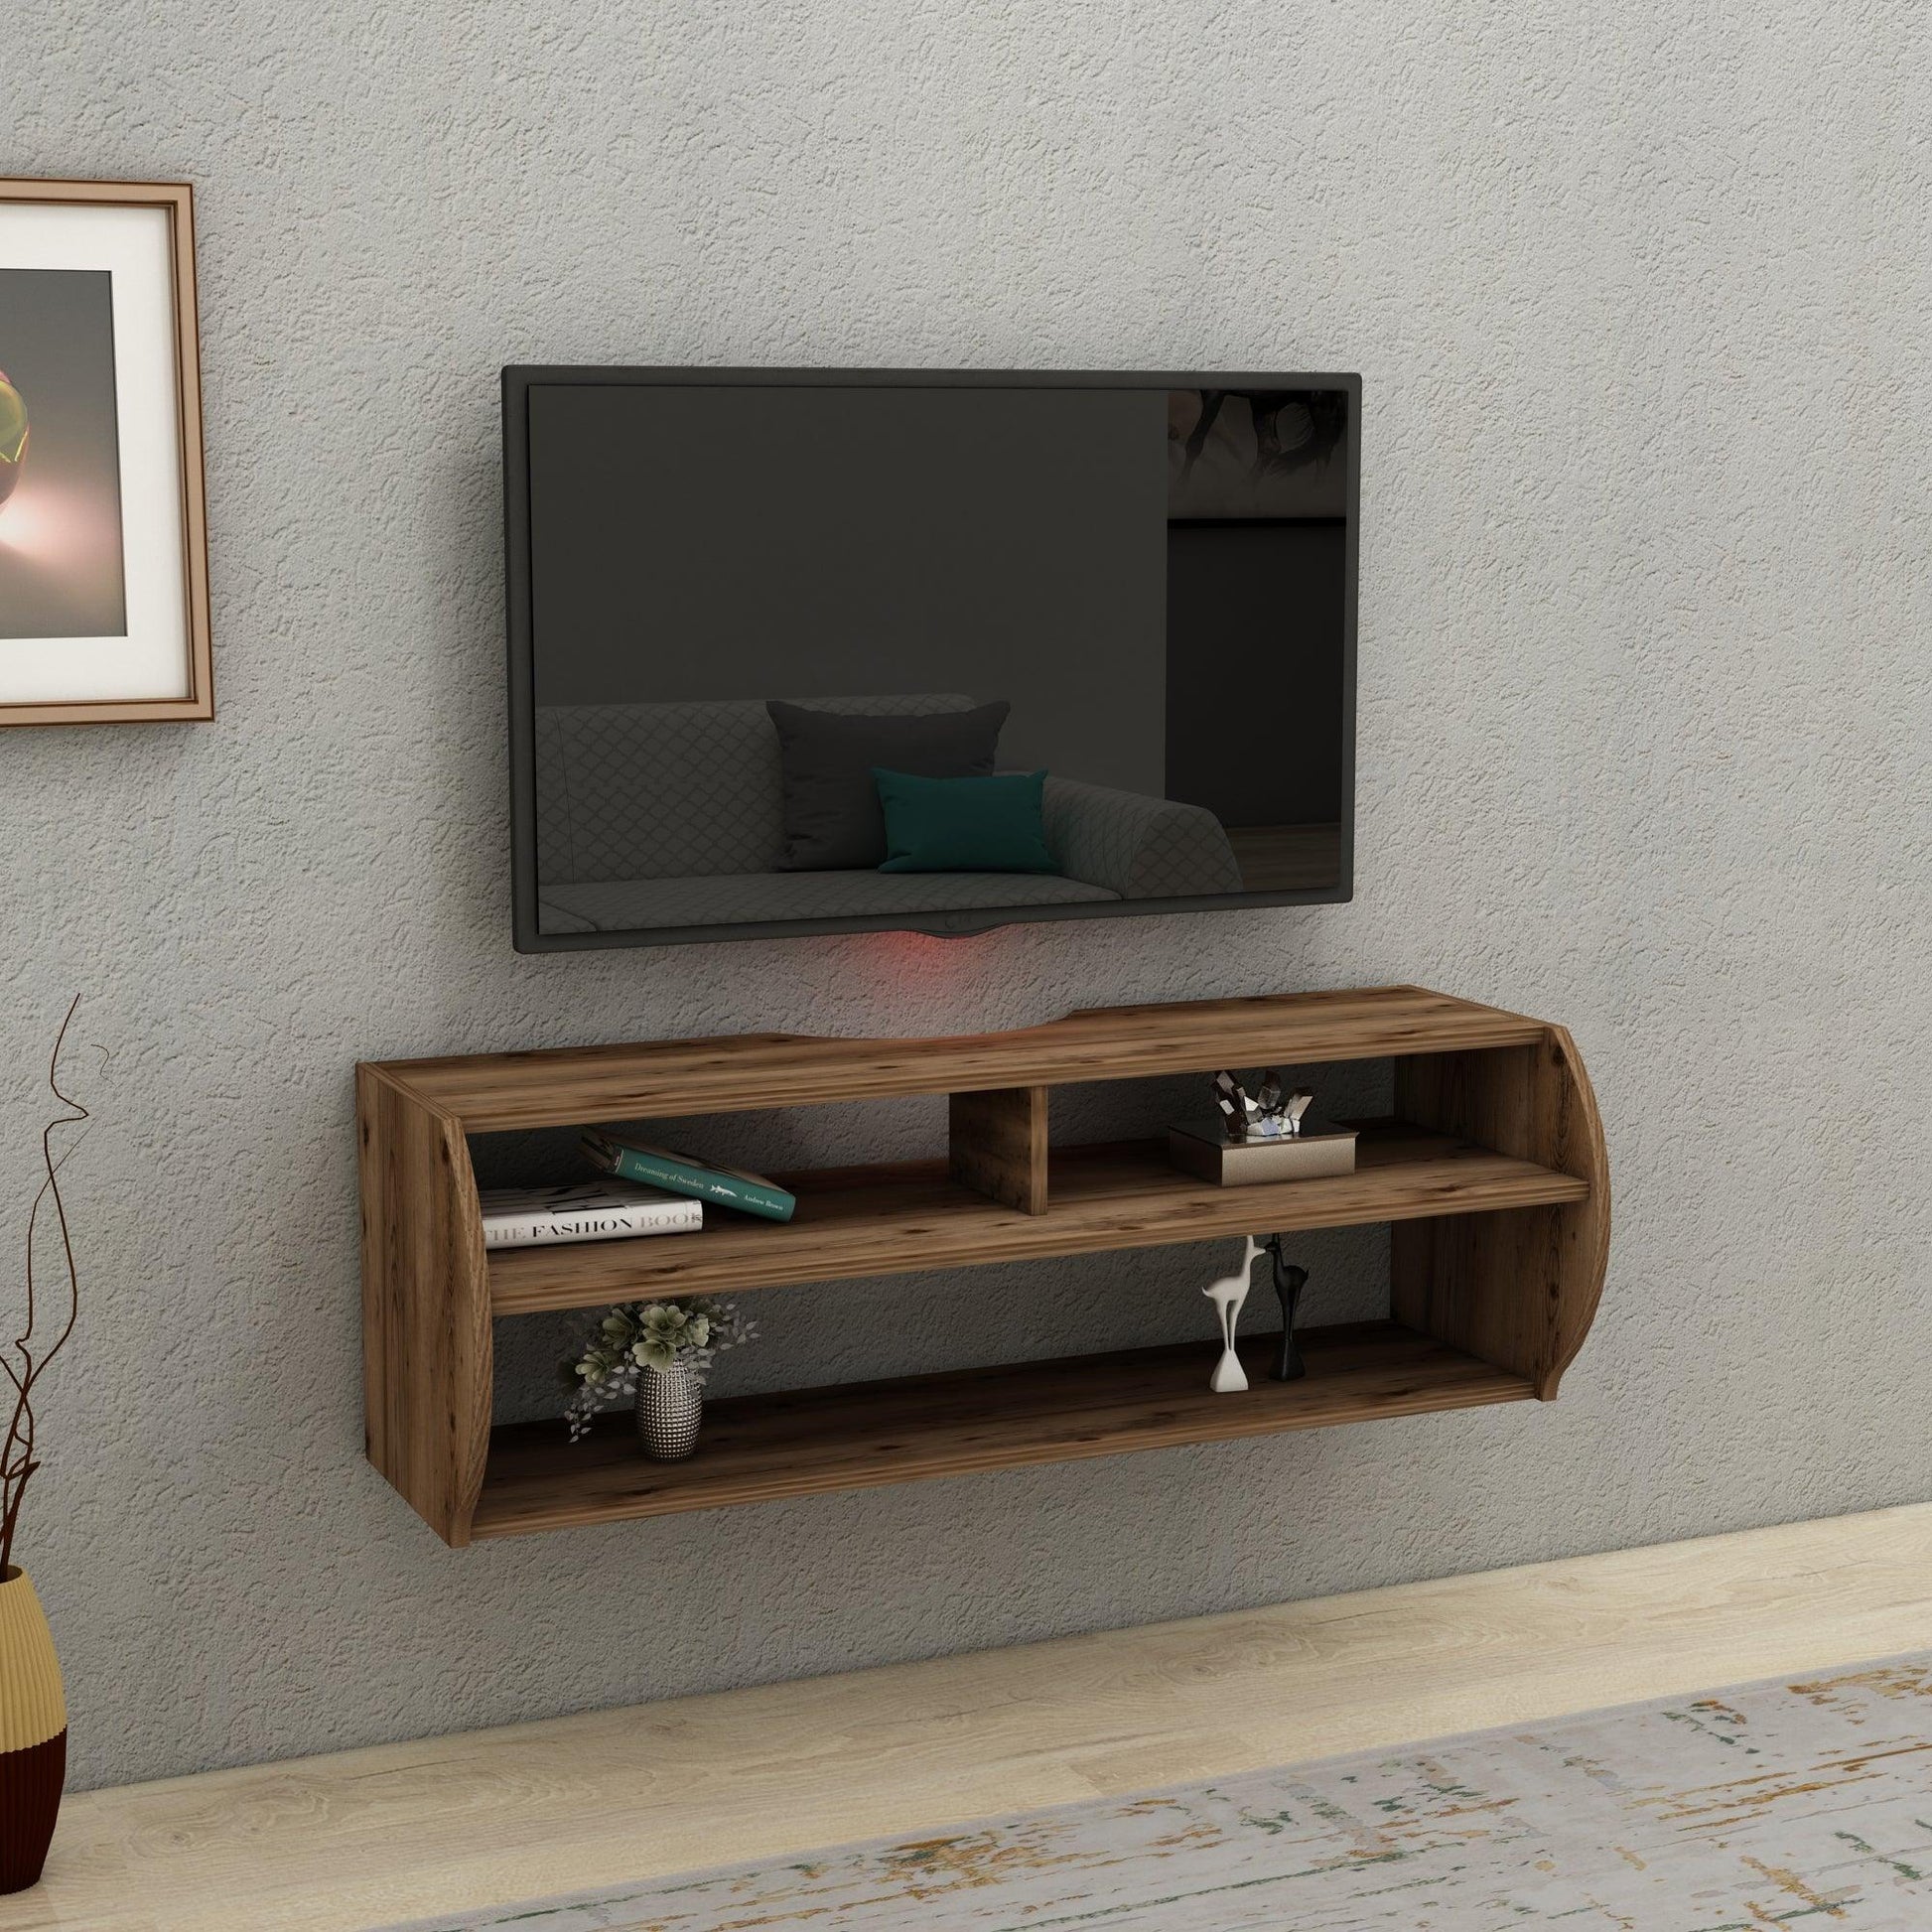 Berter Wall Mounted, Floating TV Stand with Storage Shelves - Destina Home, TV Stand, Media Console, TV cabinet, Wooden TV Stand, Media Stand, TV Lowboard, Entertainment Center, Wood TV Unit, TV Board, TV Table, Media Center, Living Room, Furniture